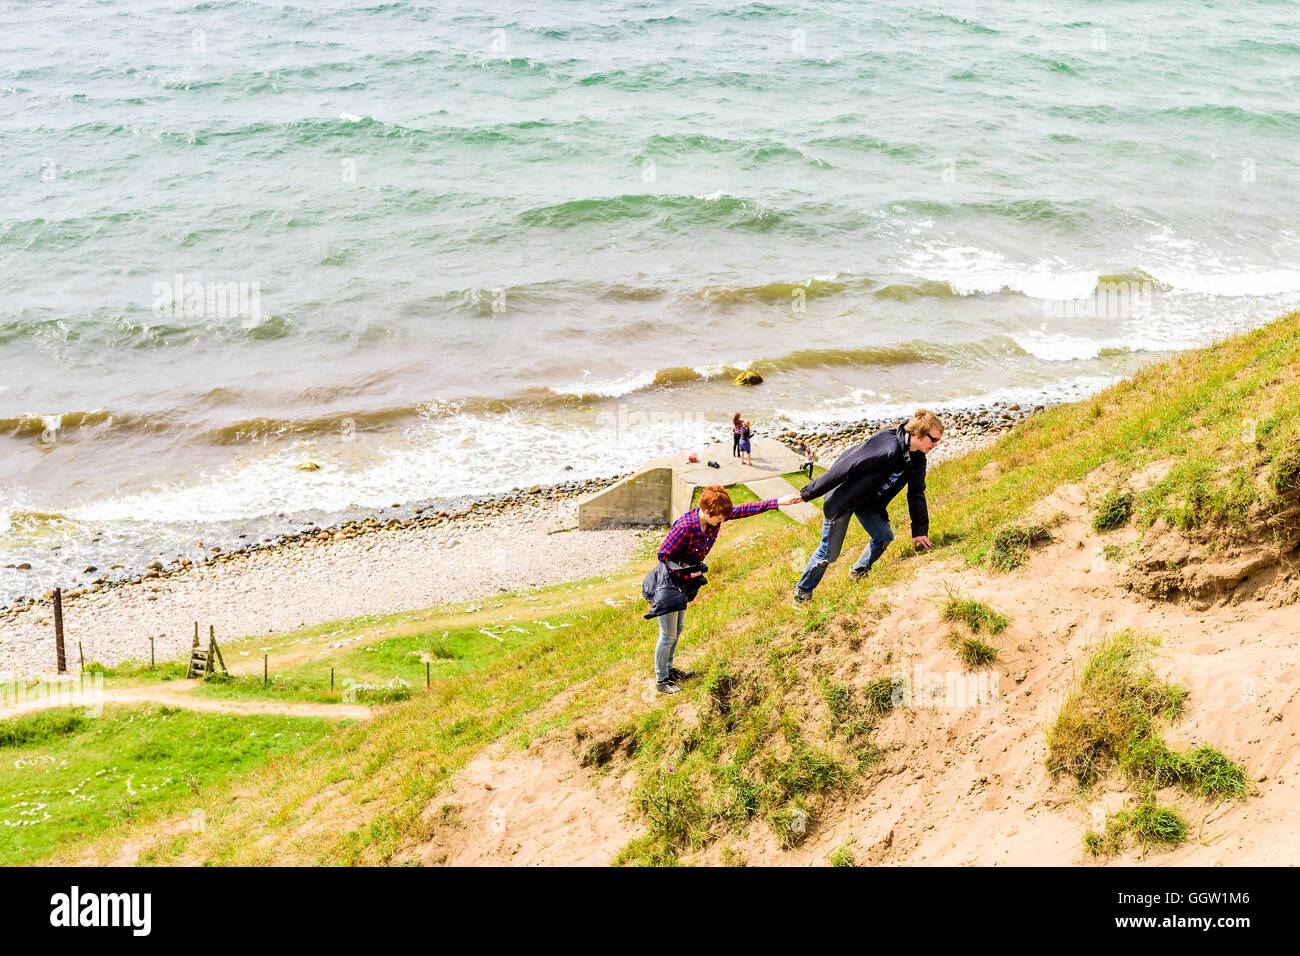 Kaseberga, Sweden - August 1, 2016: Young adult man helping a woman climb a steep sandy hill from the ocean below. Real life sit Stock Photo